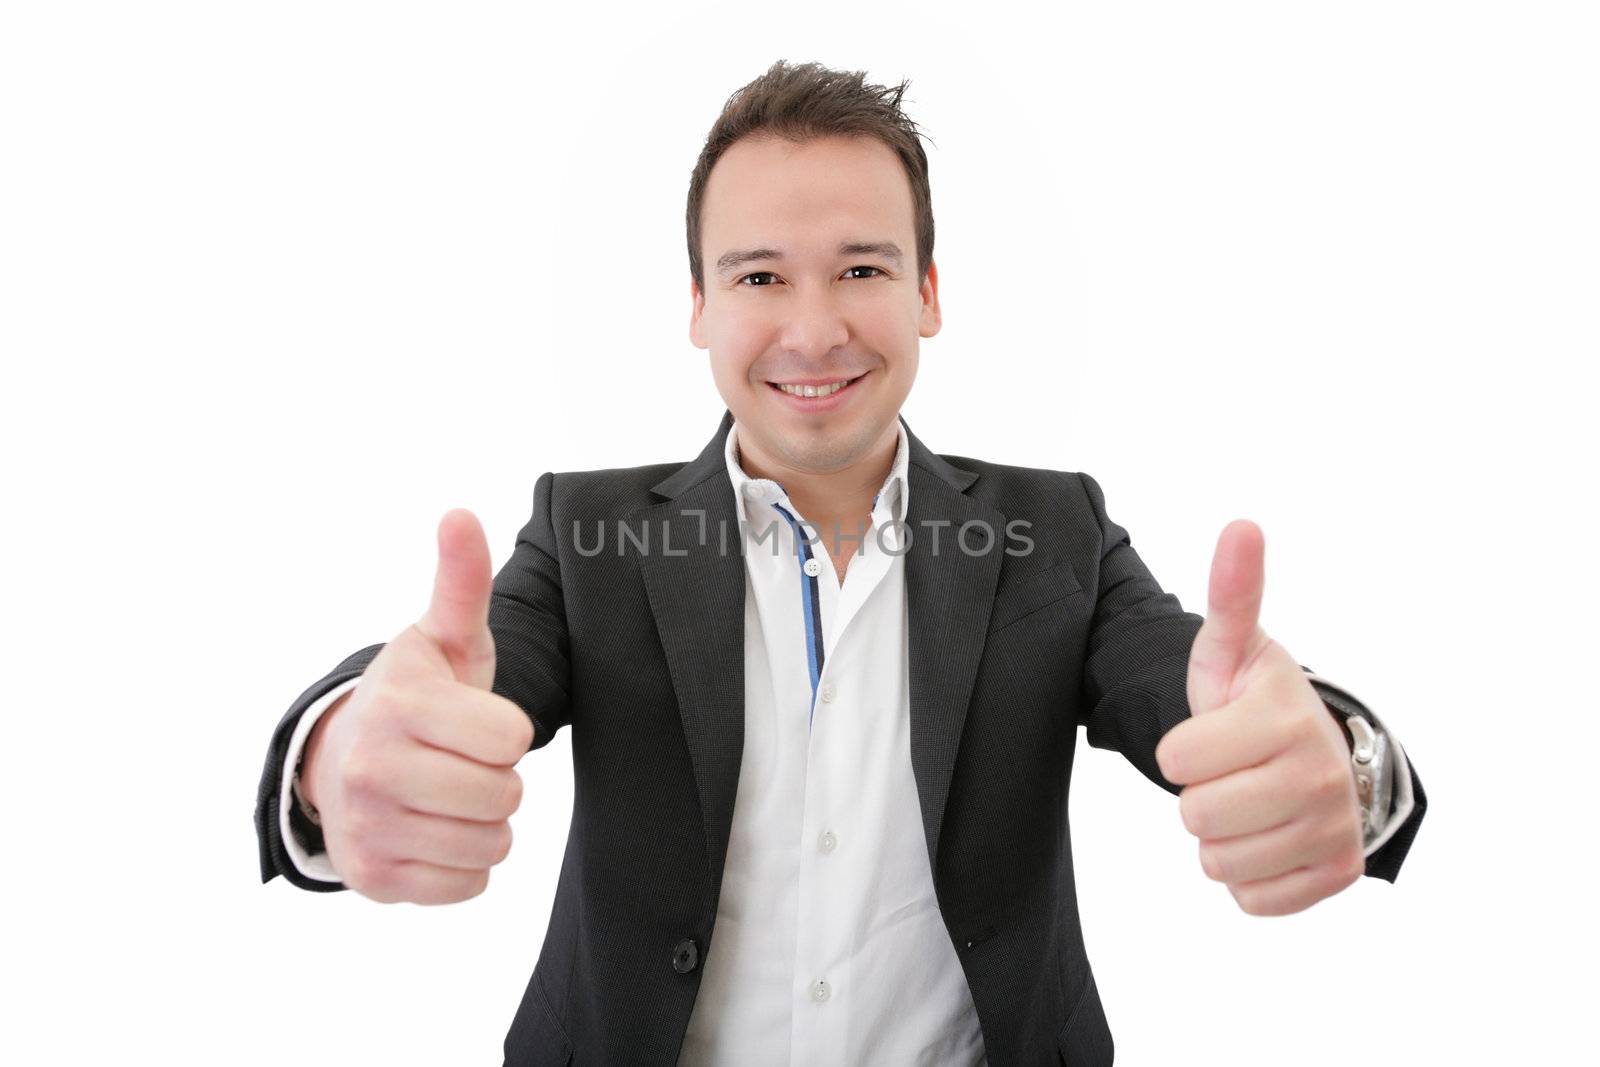 Smiling young business man thumbs up, isolated on white. Focus on man